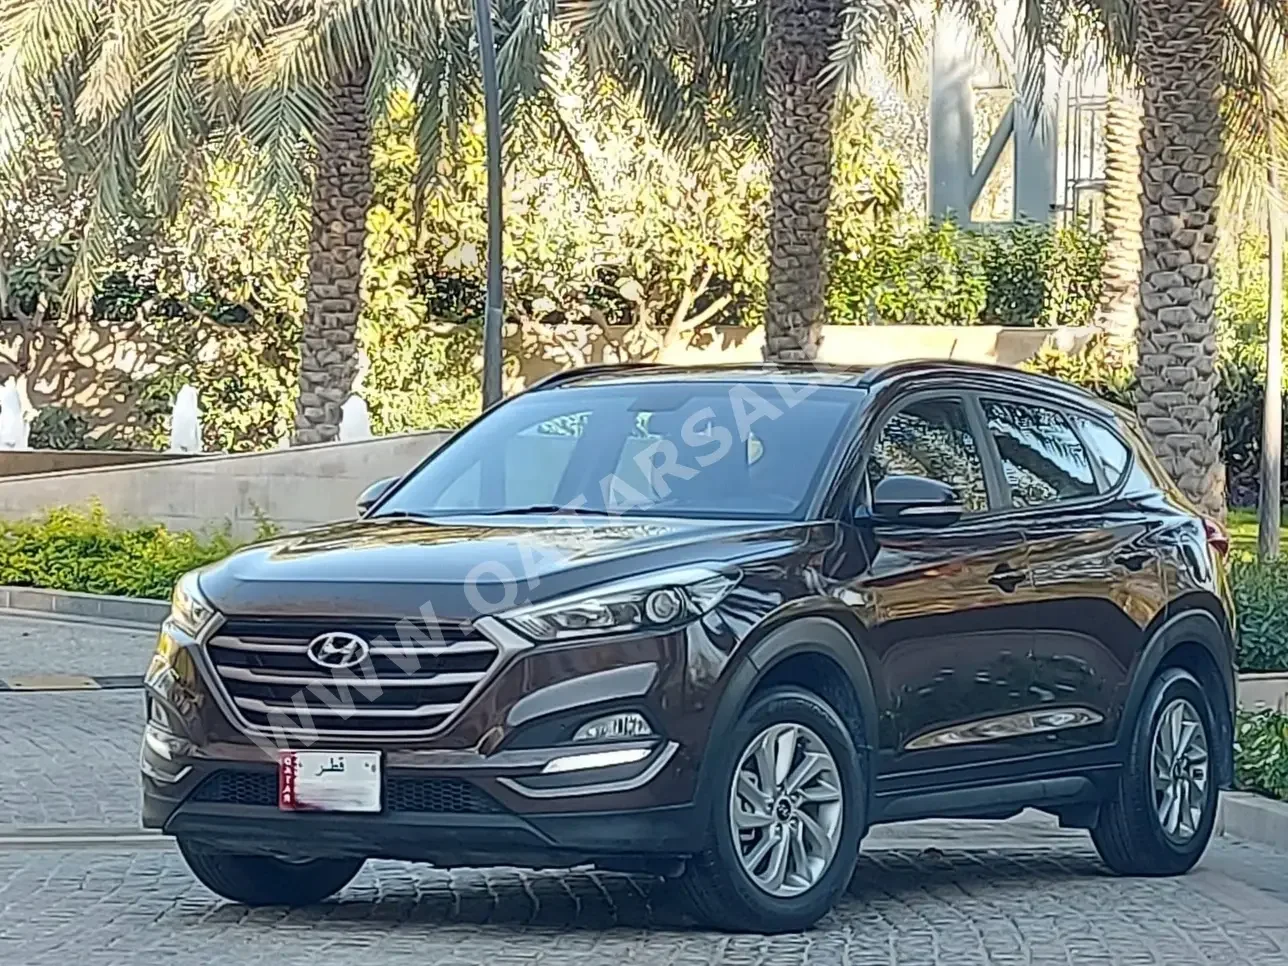 Hyundai  Tucson  2018  Automatic  152,000 Km  4 Cylinder  Front Wheel Drive (FWD)  SUV  Brown